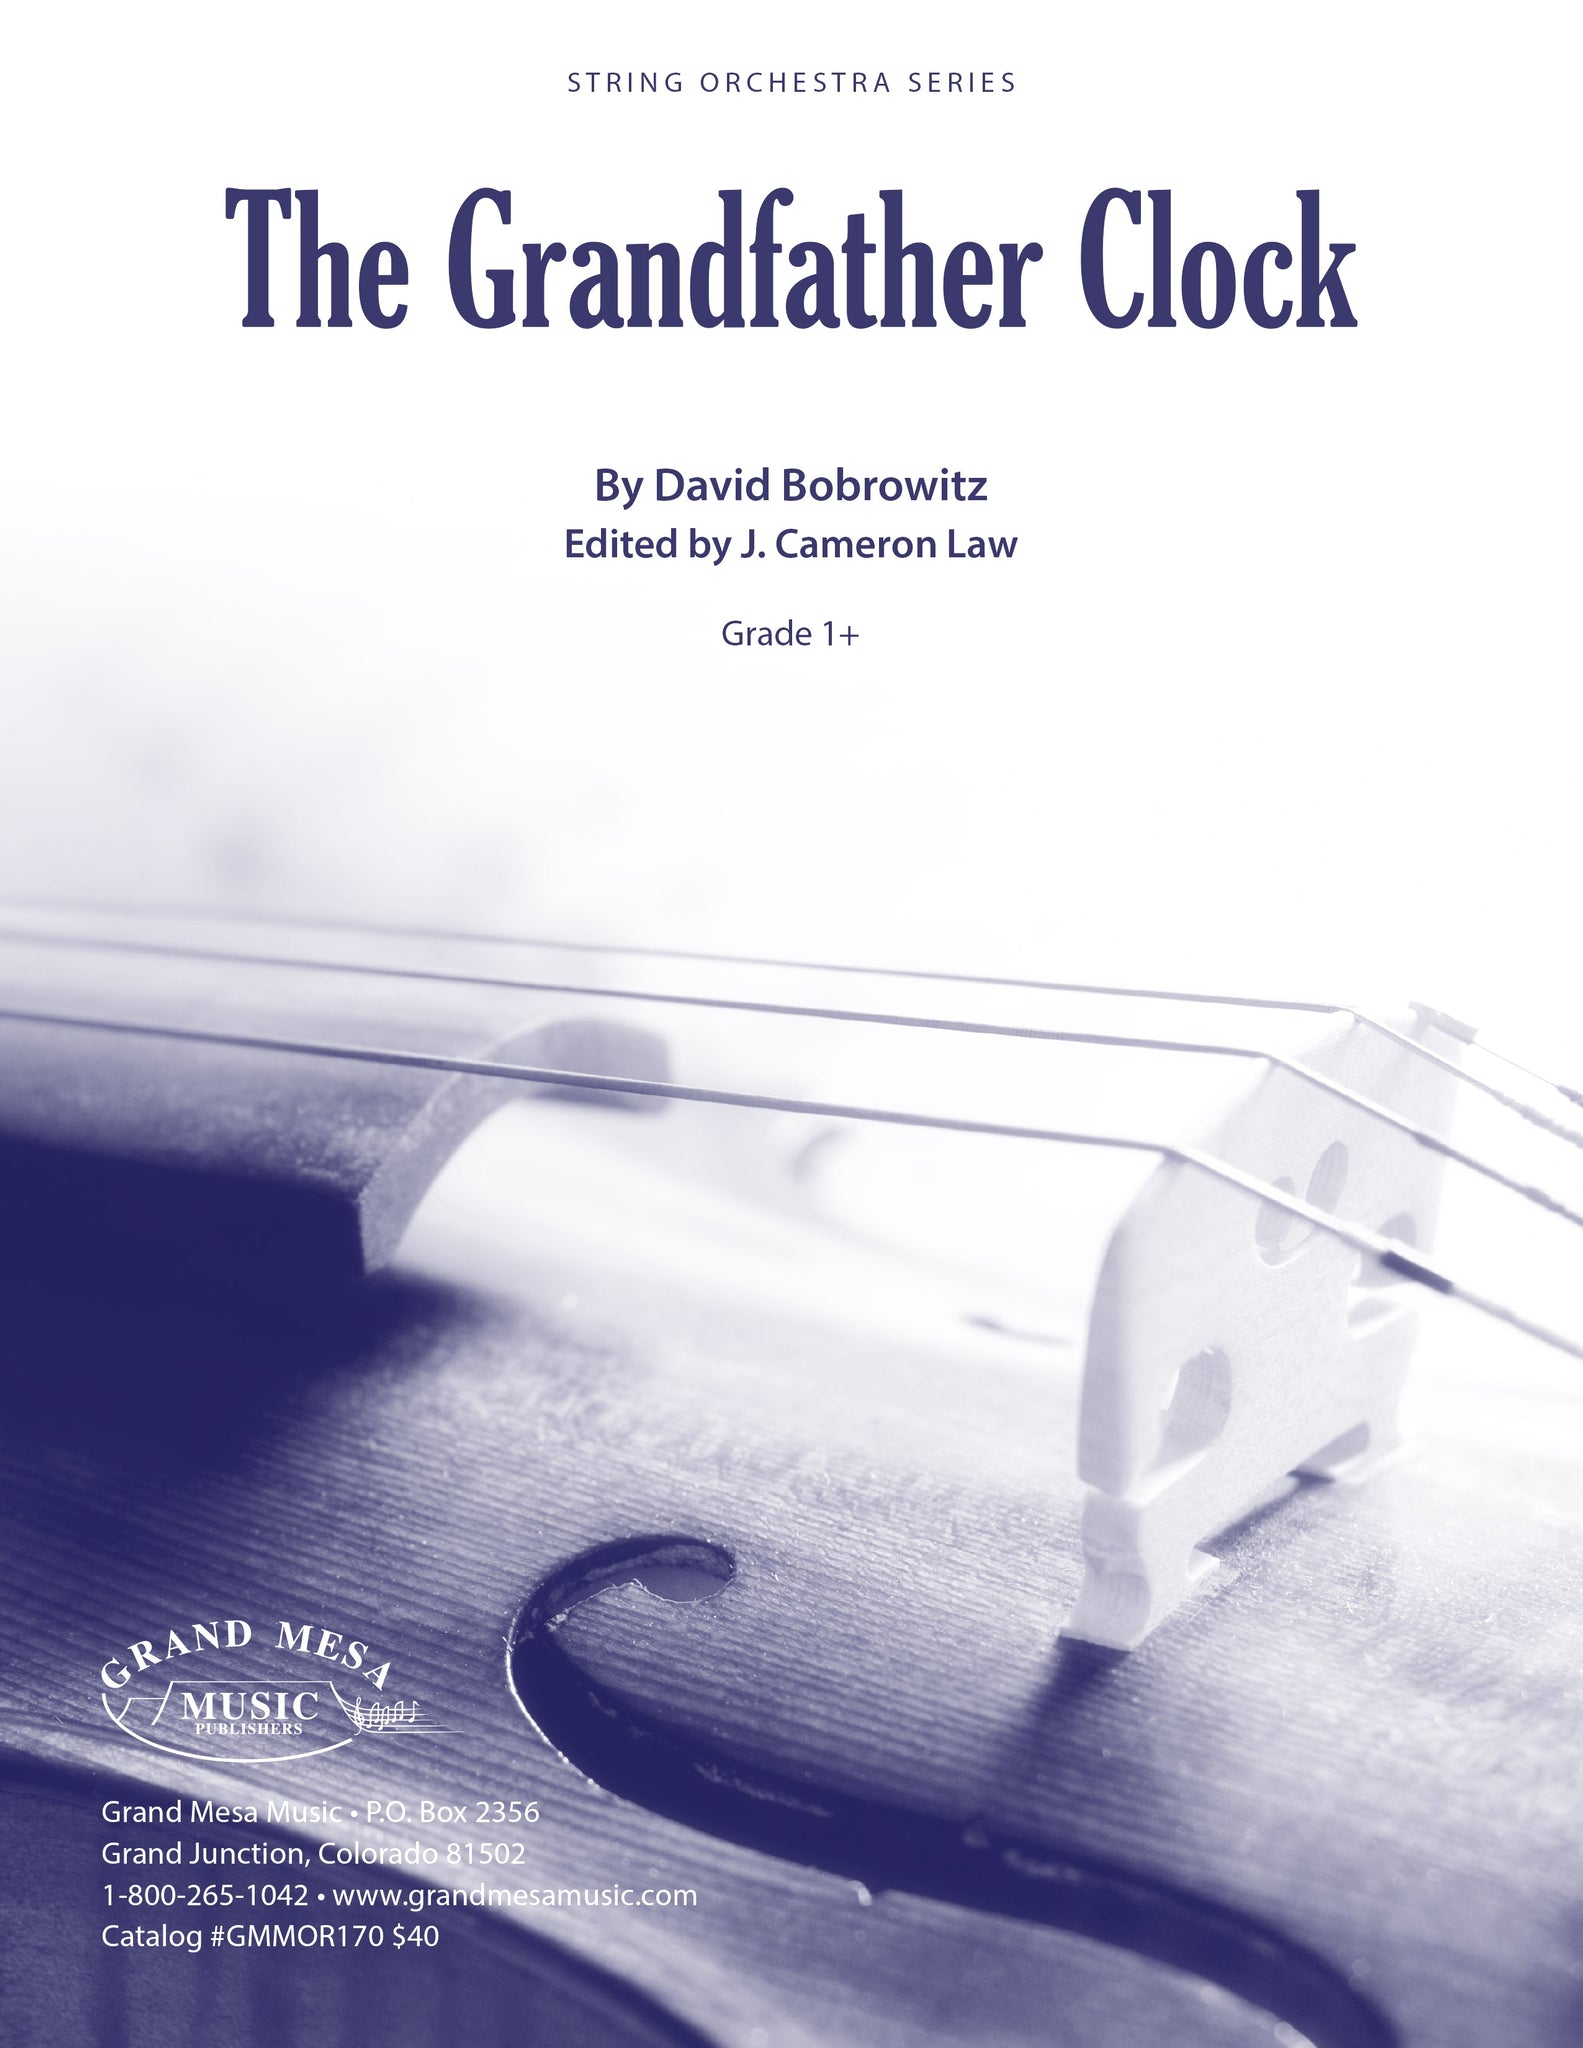 Strings sheet music cover of The Grandfather Clock, composed by David Bobrowitz.